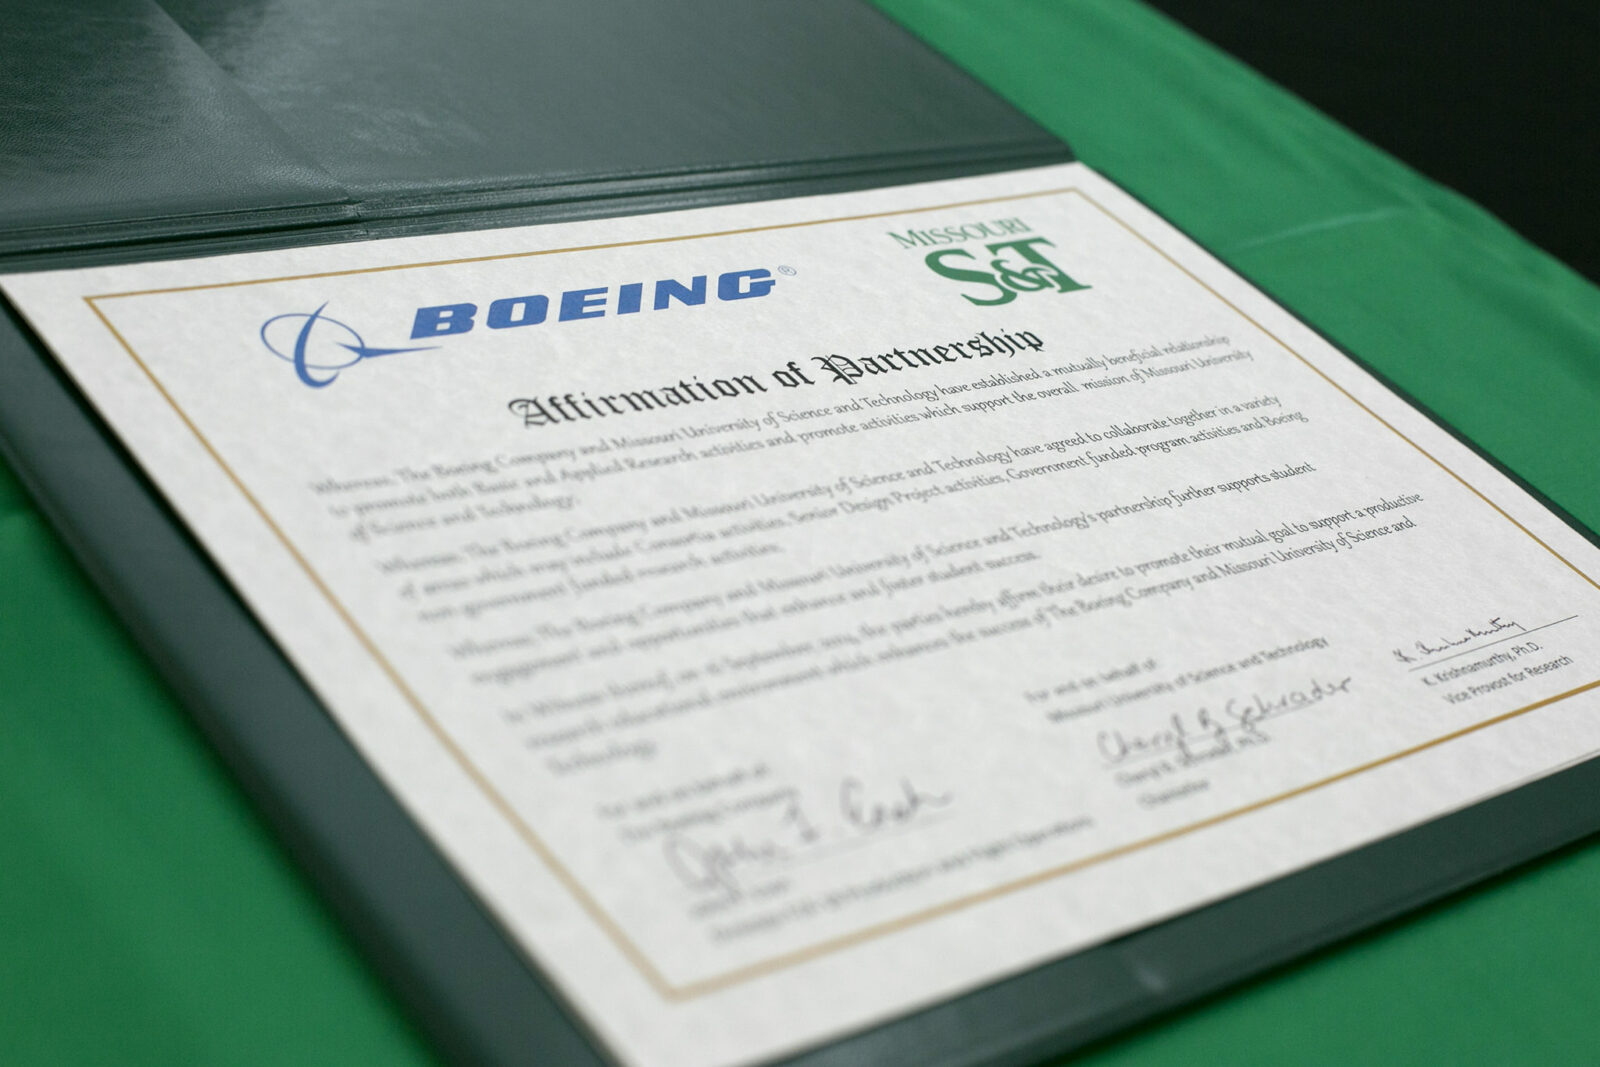 Missouri S&T and Boeing formalized a master research agreement on Tuesday, Sept. 16, 2014. Sam O'Keefe/Missouri S&T